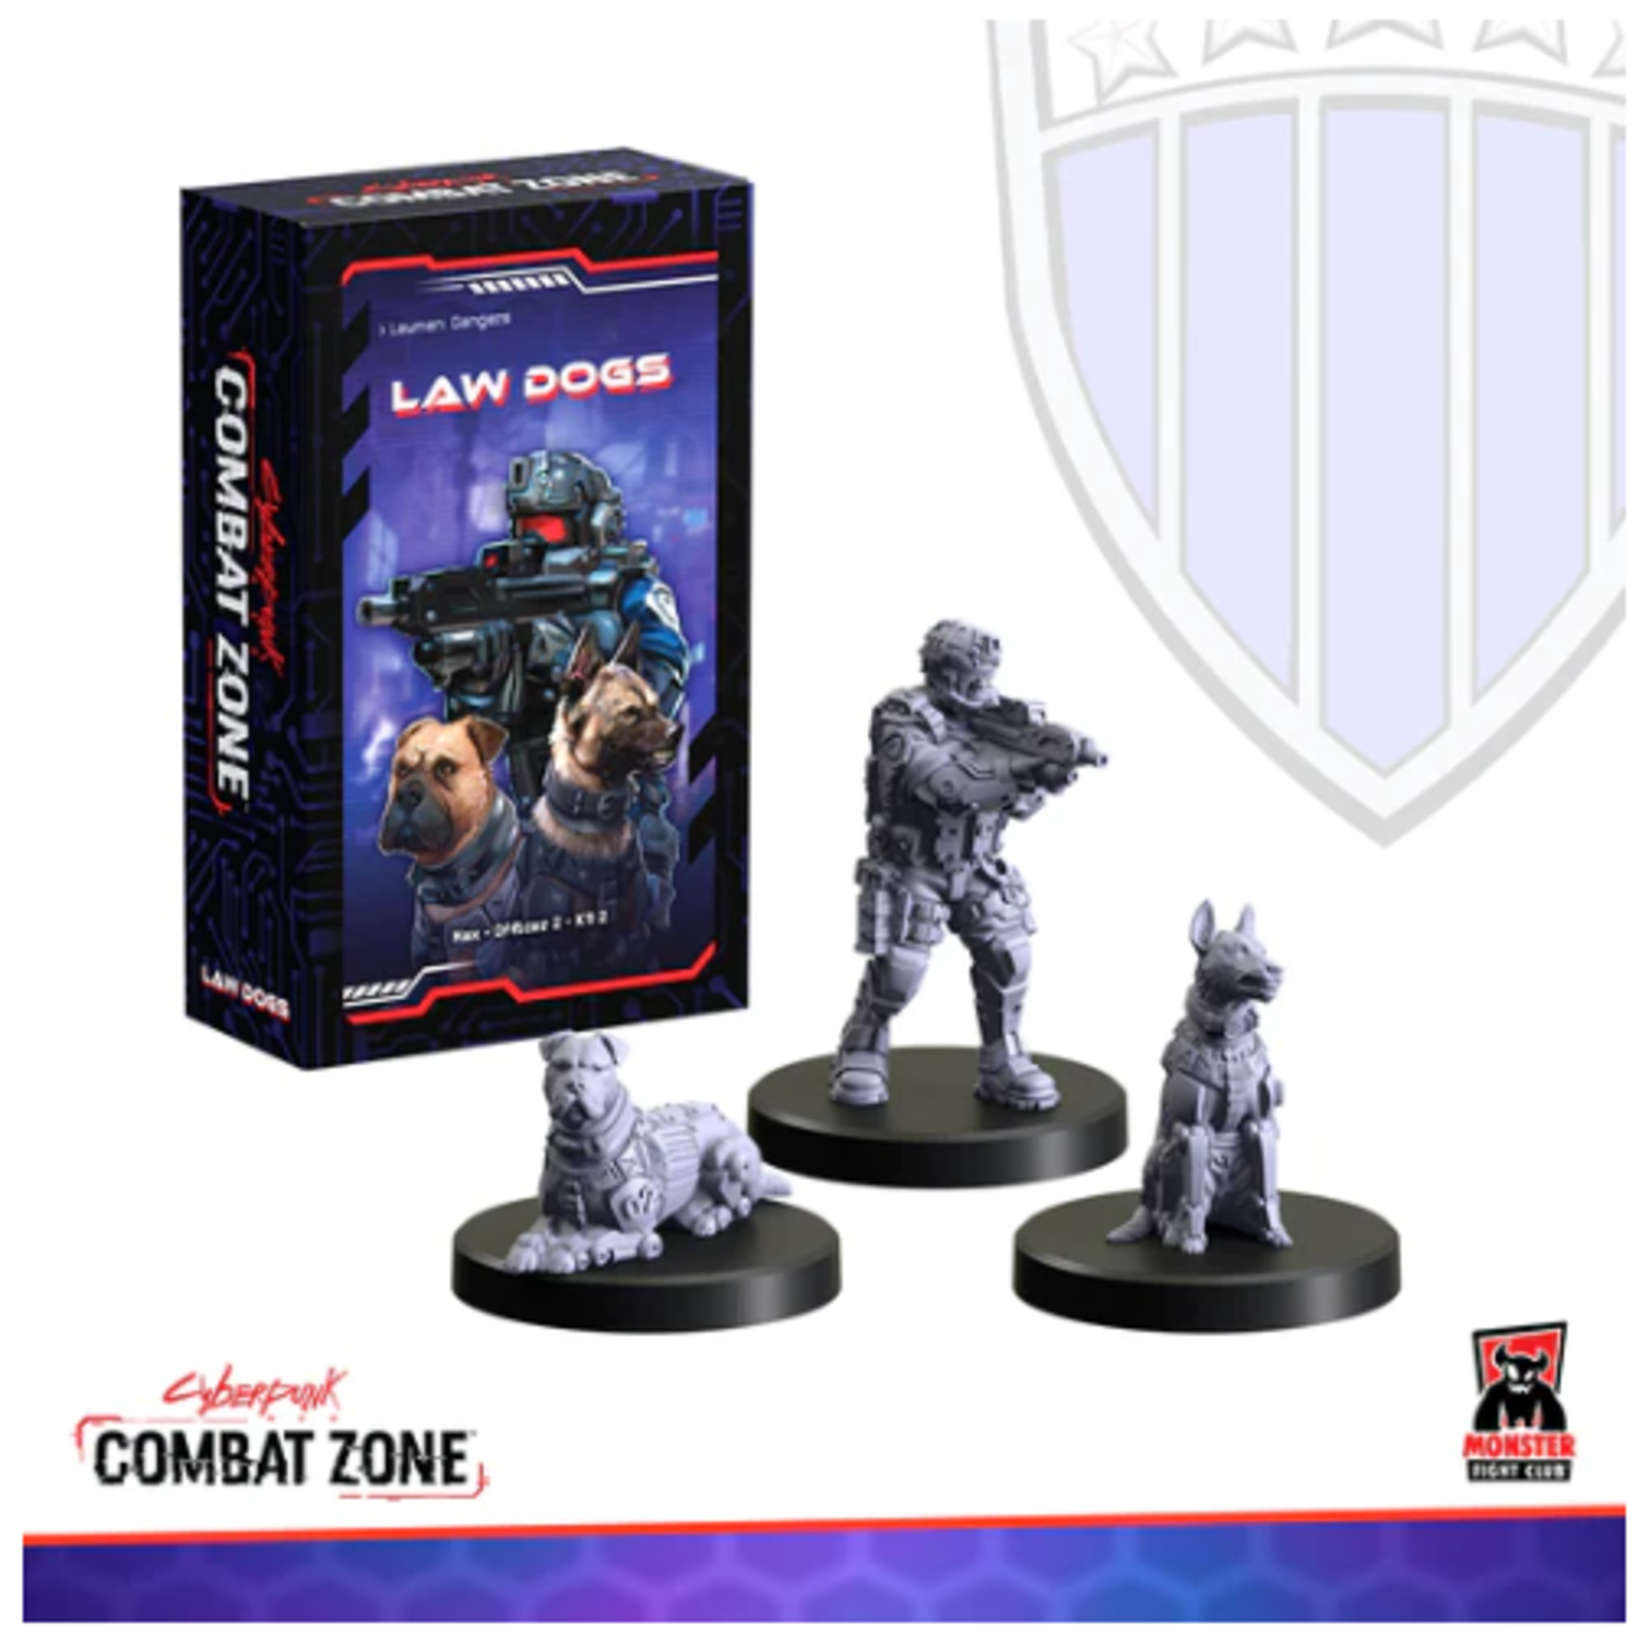 Monster Fight Club Cyberpunk Red: Combat Zone: Law Dogs